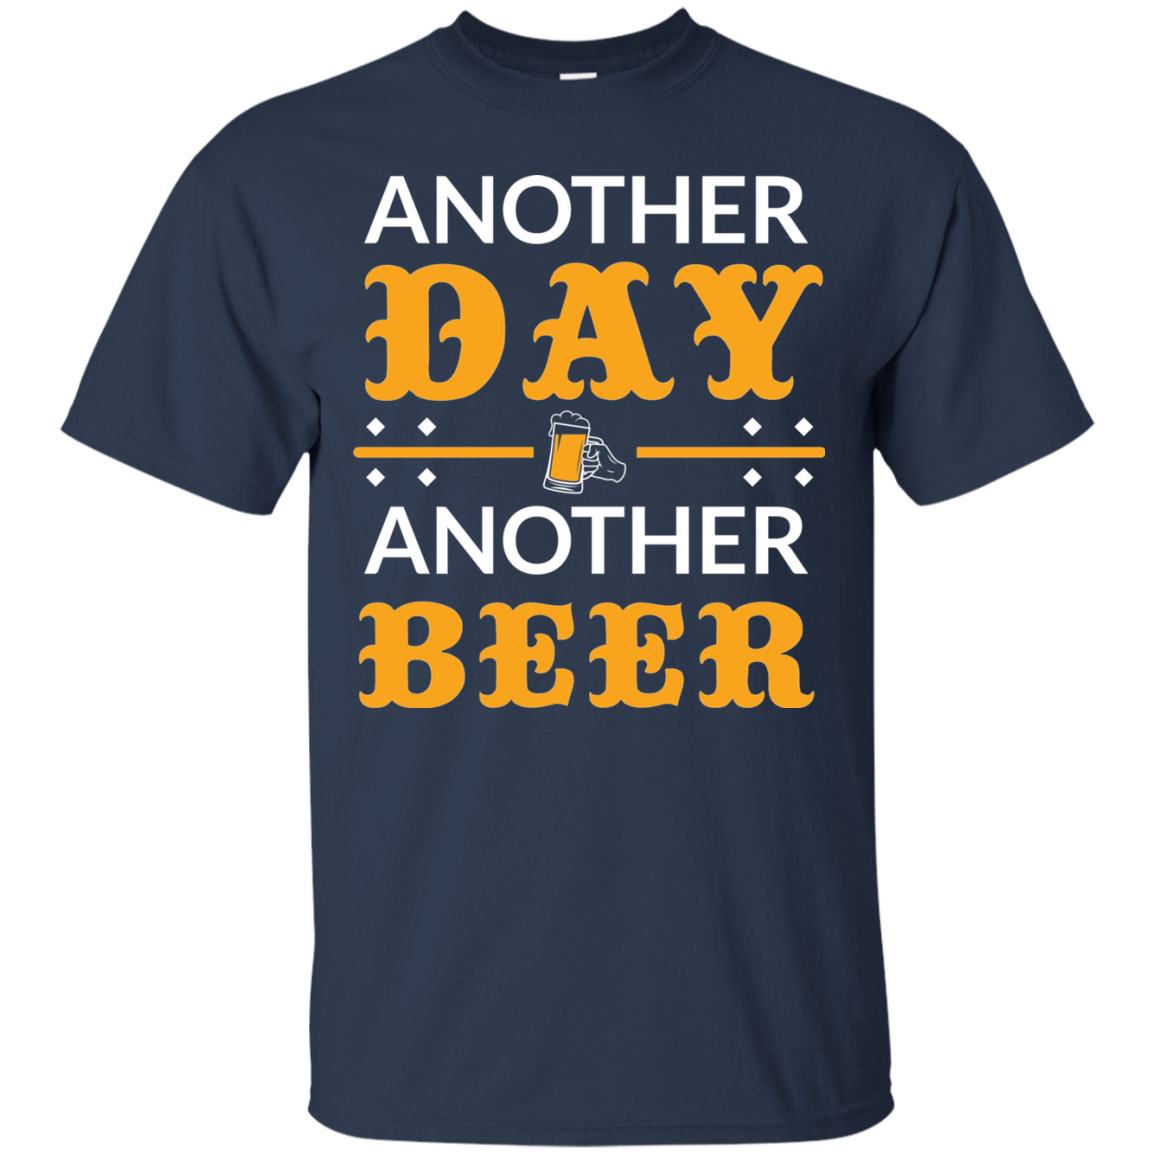 Another Day, Another Beer T-Shirt Apparel - The Beer Lodge